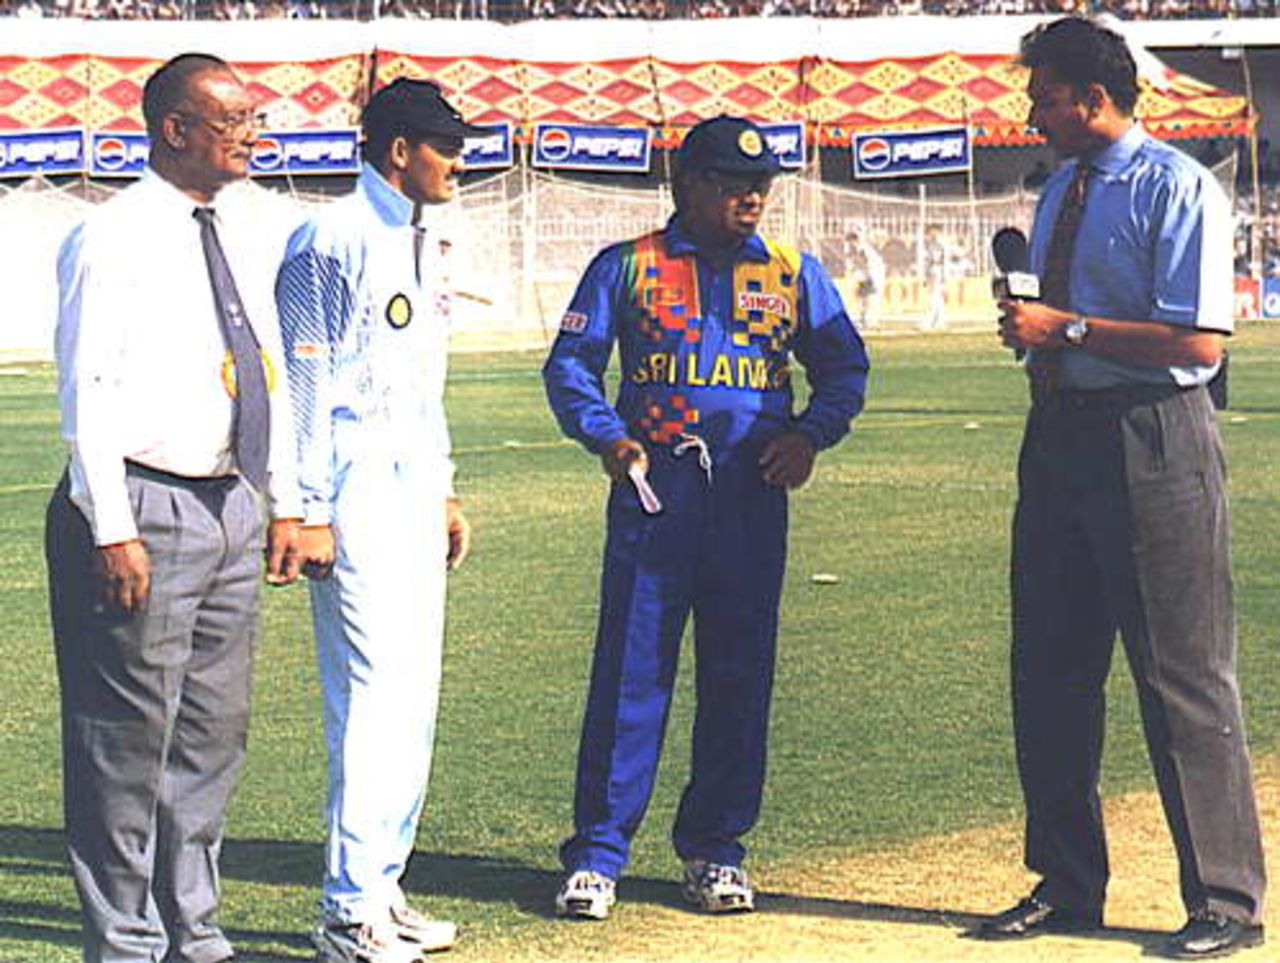 Arjuna Ranatunga and Mohammad Azharuddin at the toss along with Match Referee Cammie Smith and TV Commentator Ravi Shastri